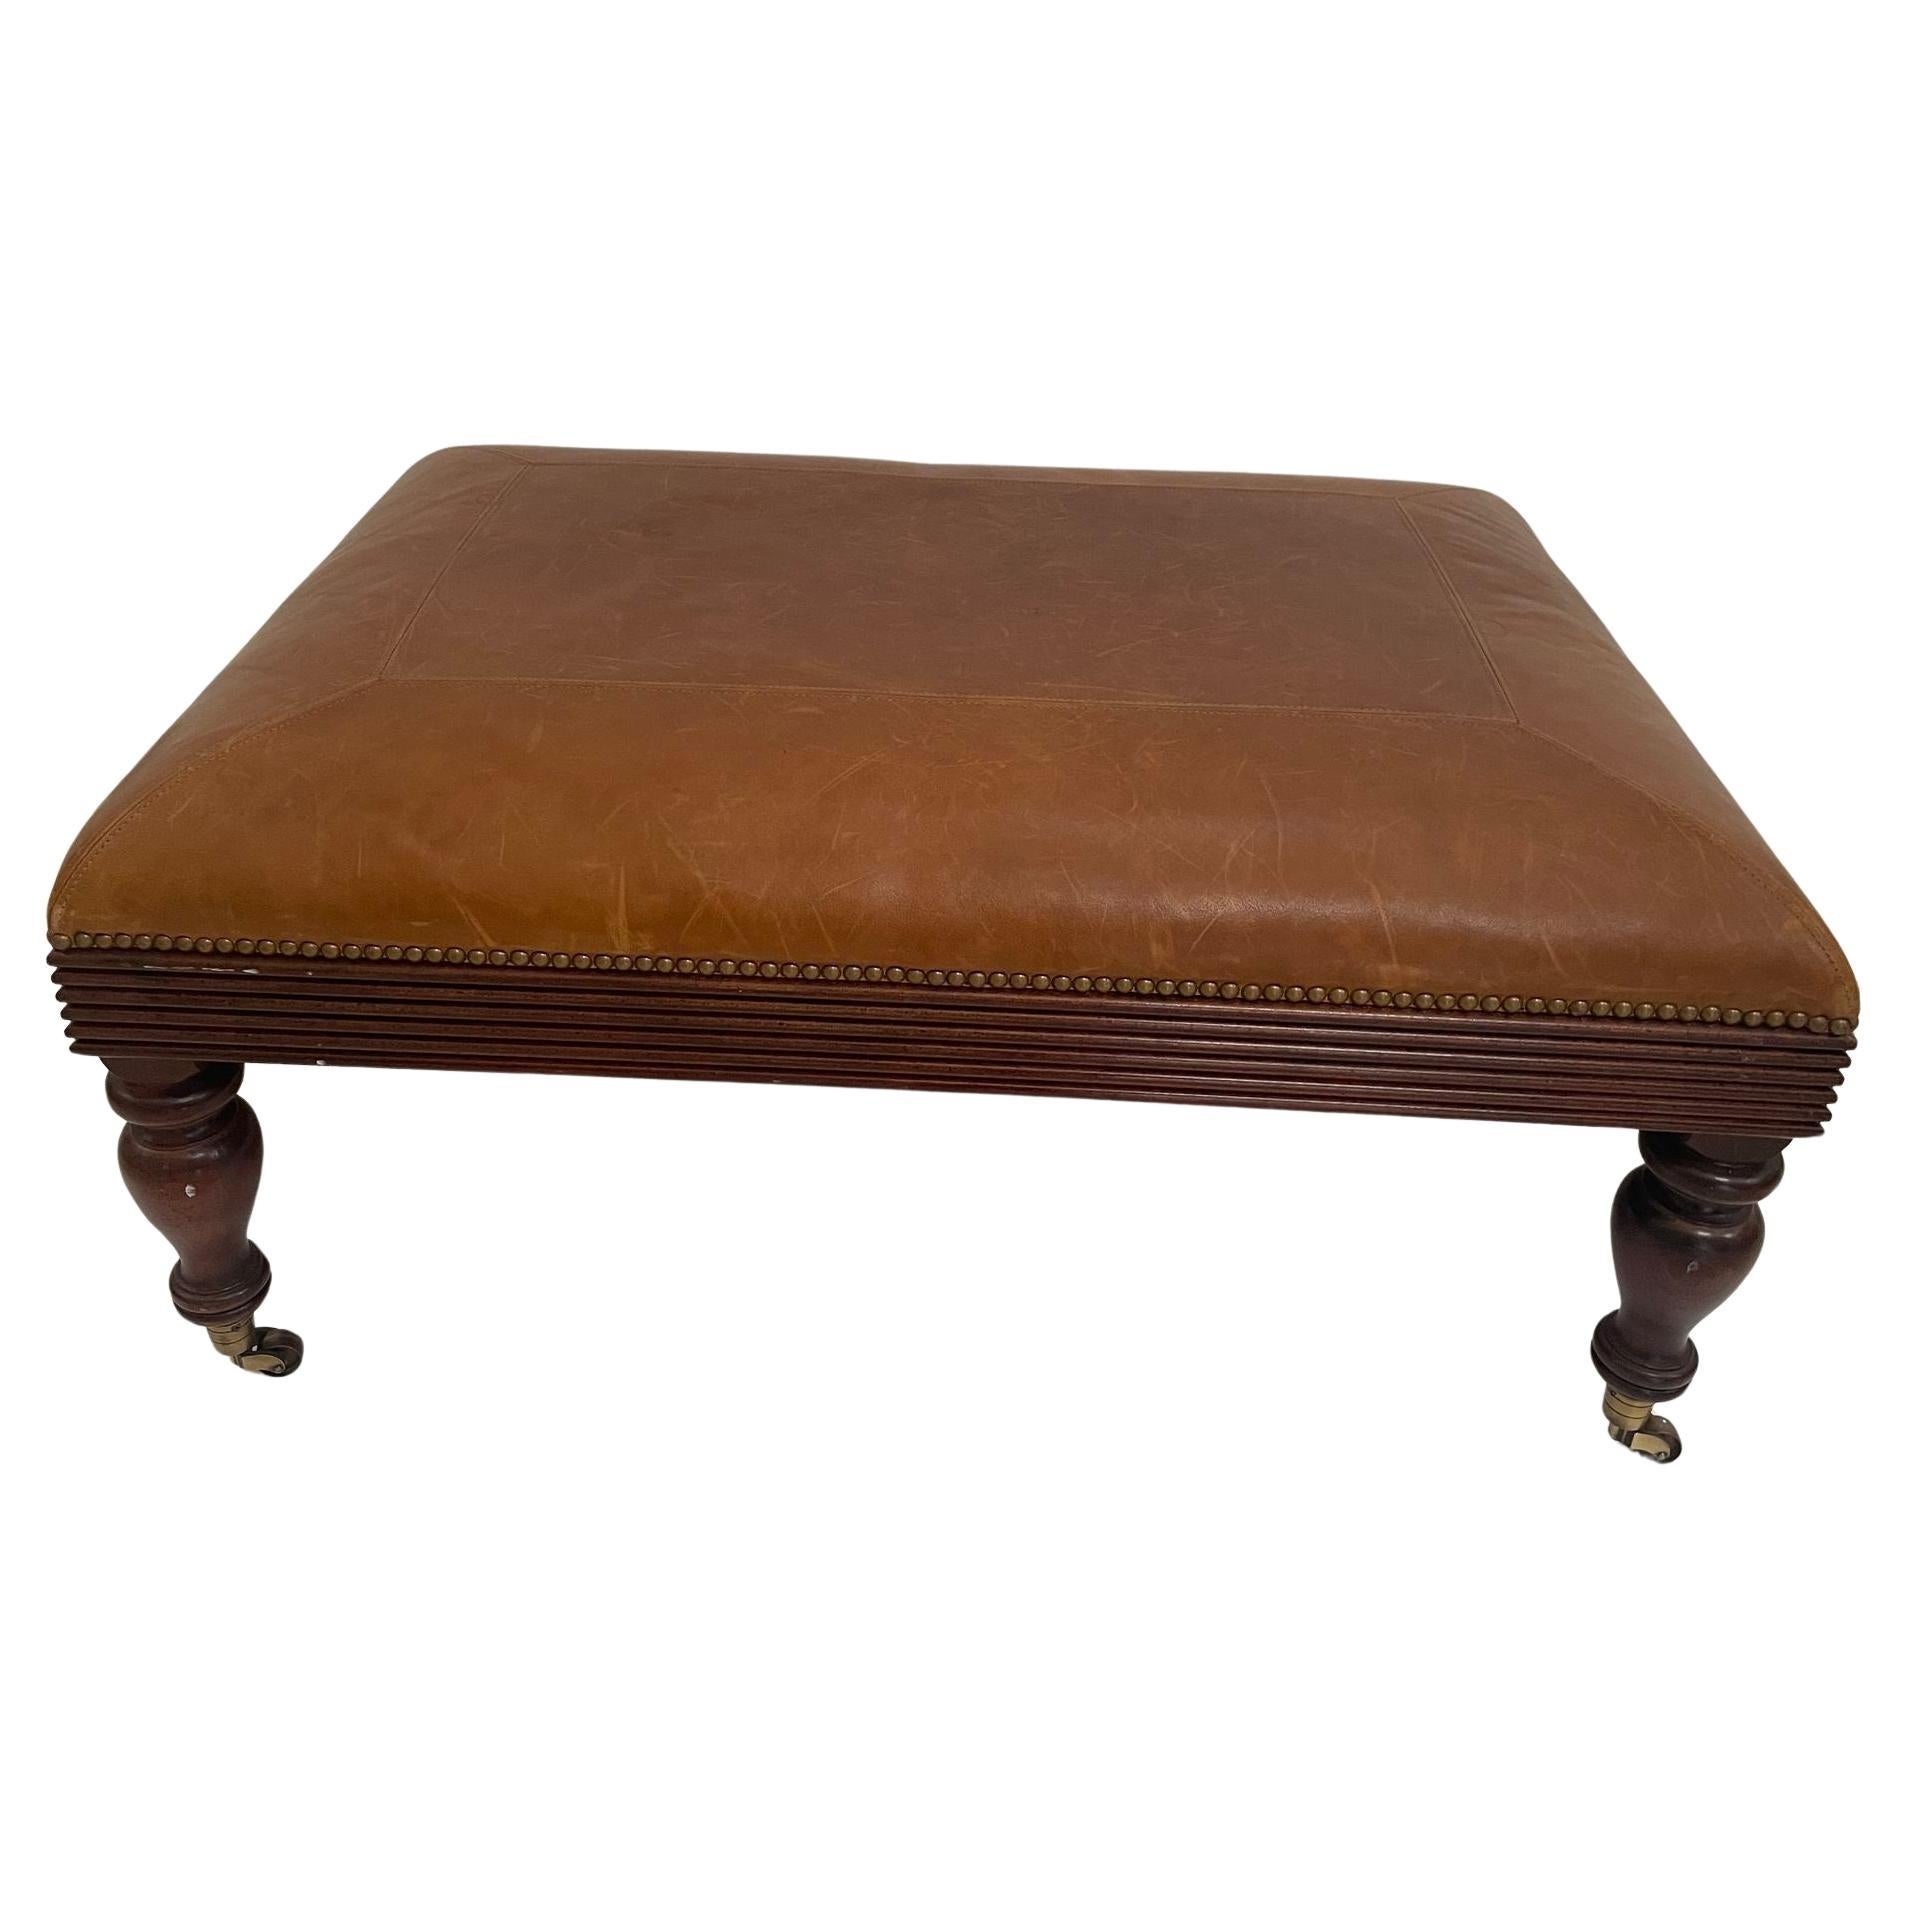 Victorian English Style leather Ottoman with Brass Casters and Nailhead Trim For Sale